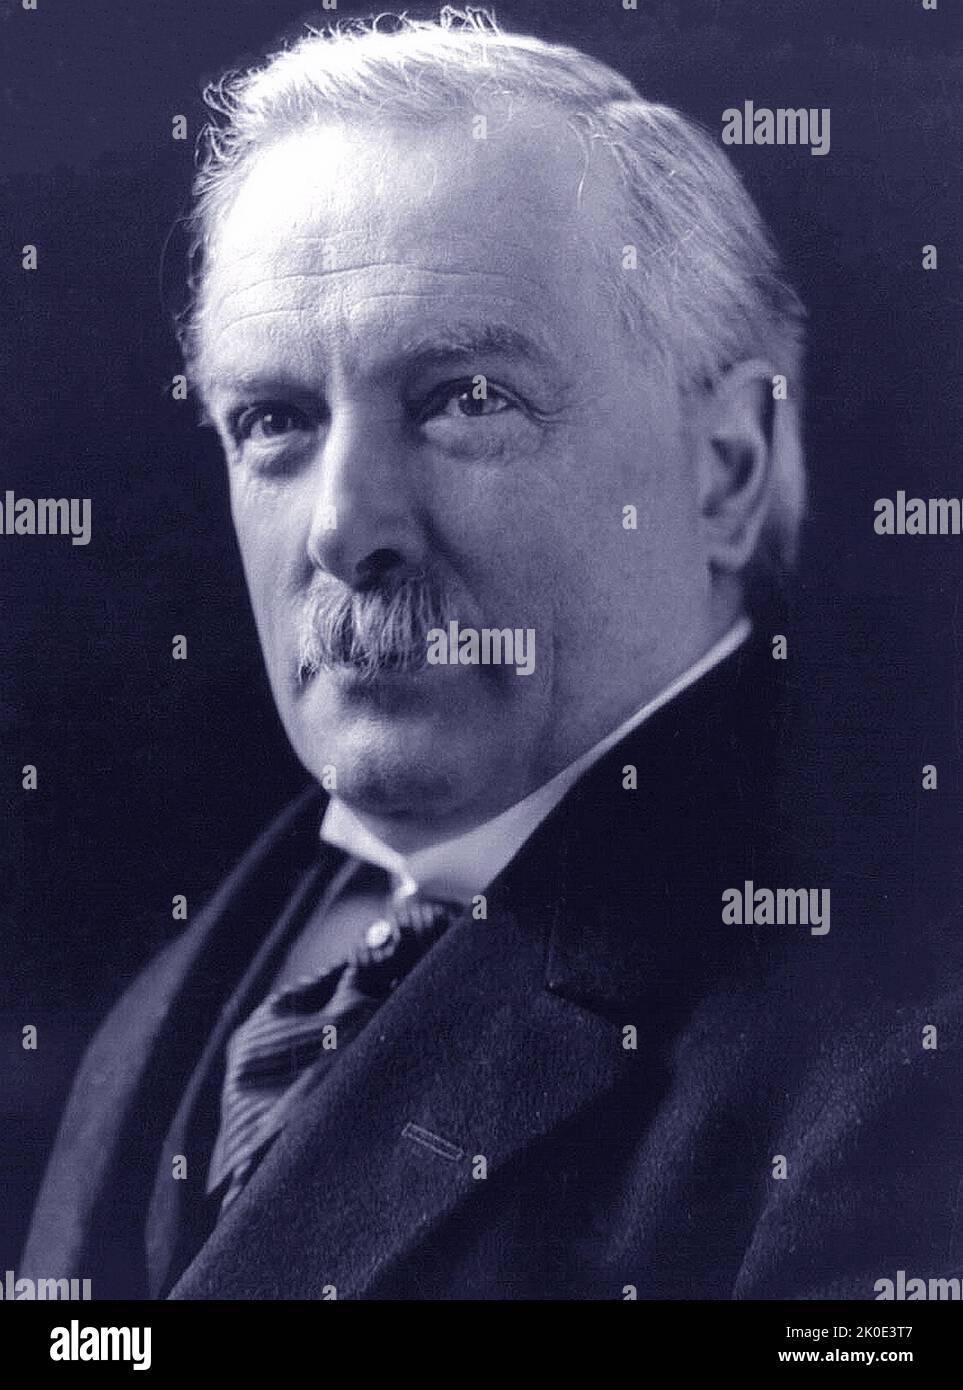 David Lloyd George, (1863 - 26 March 1945) Welsh statesman and Liberal Party politician who served as Prime Minister of the United Kingdom from 1916 to 1922. He was the last Liberal to hold the post of prime minister and held the office through the last two years of the First World War, leading the British delegation at the Paris Peace Conference in 1919. Stock Photo